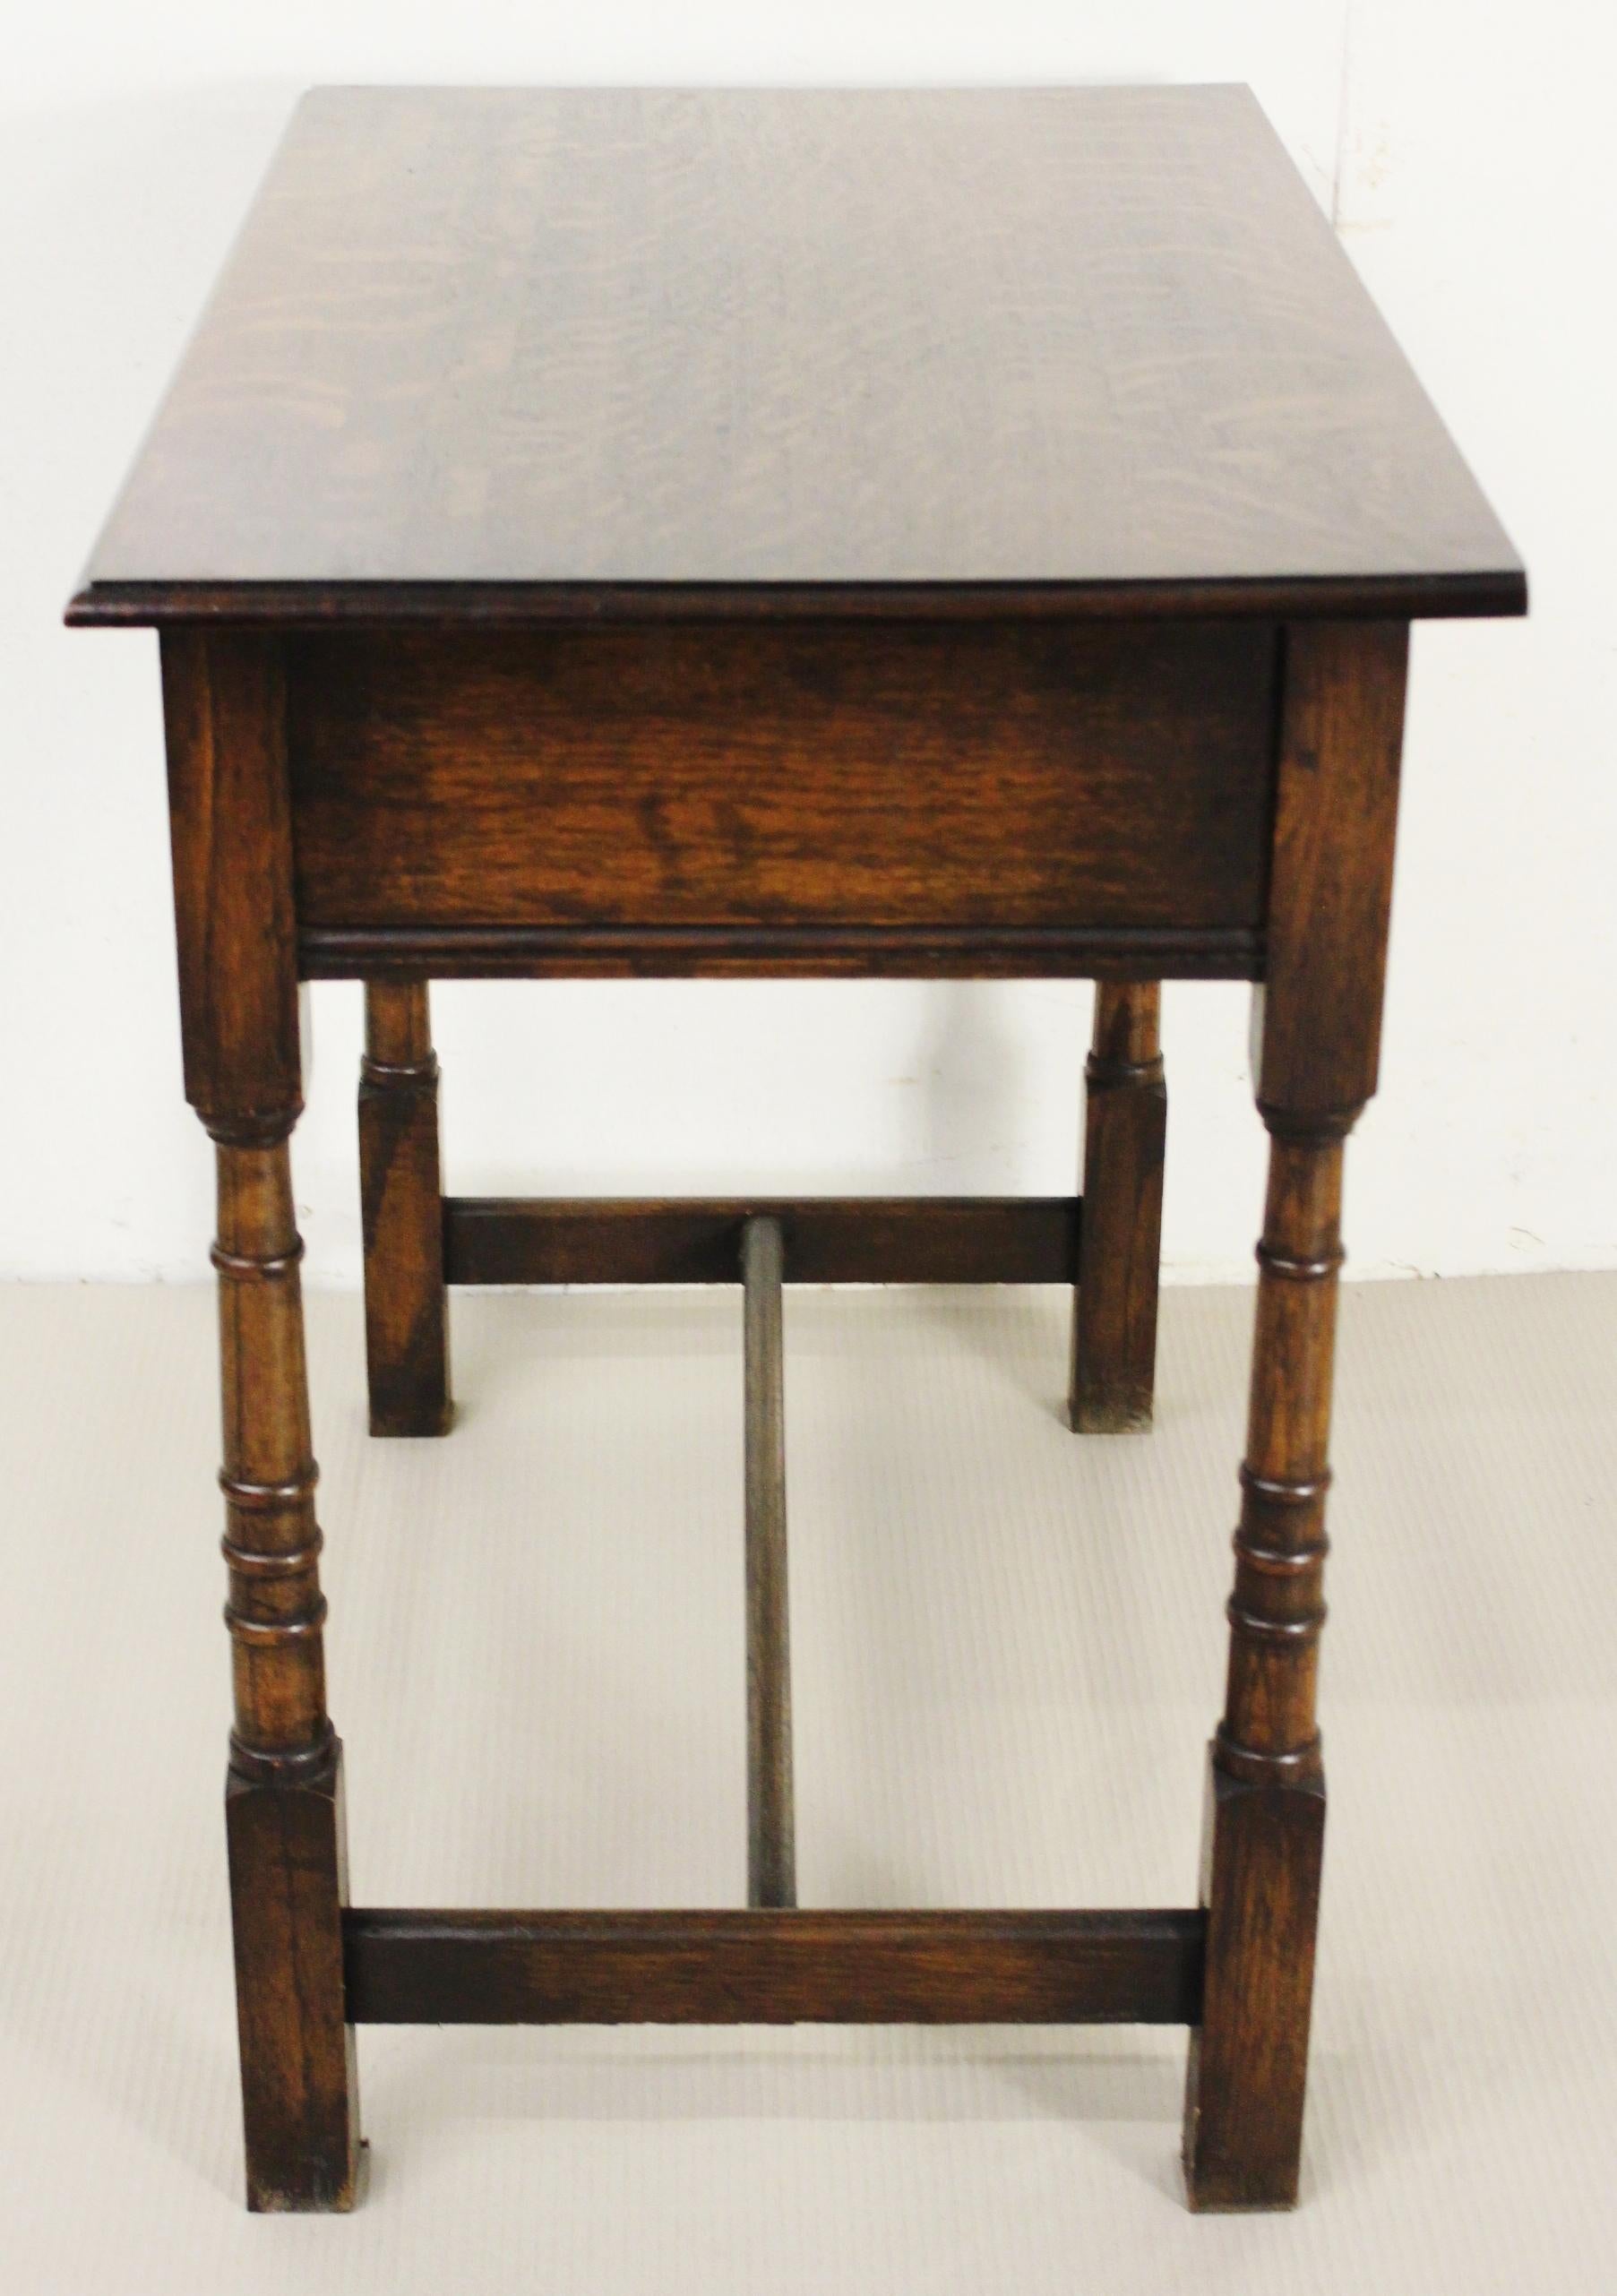 A charming 2 drawer oak side table. Well-constructed in solid English oak. Each drawer fitted with nice original brass drop handles. Offered for sale in very good condition with a great colour and patina ready to go straight into the home.